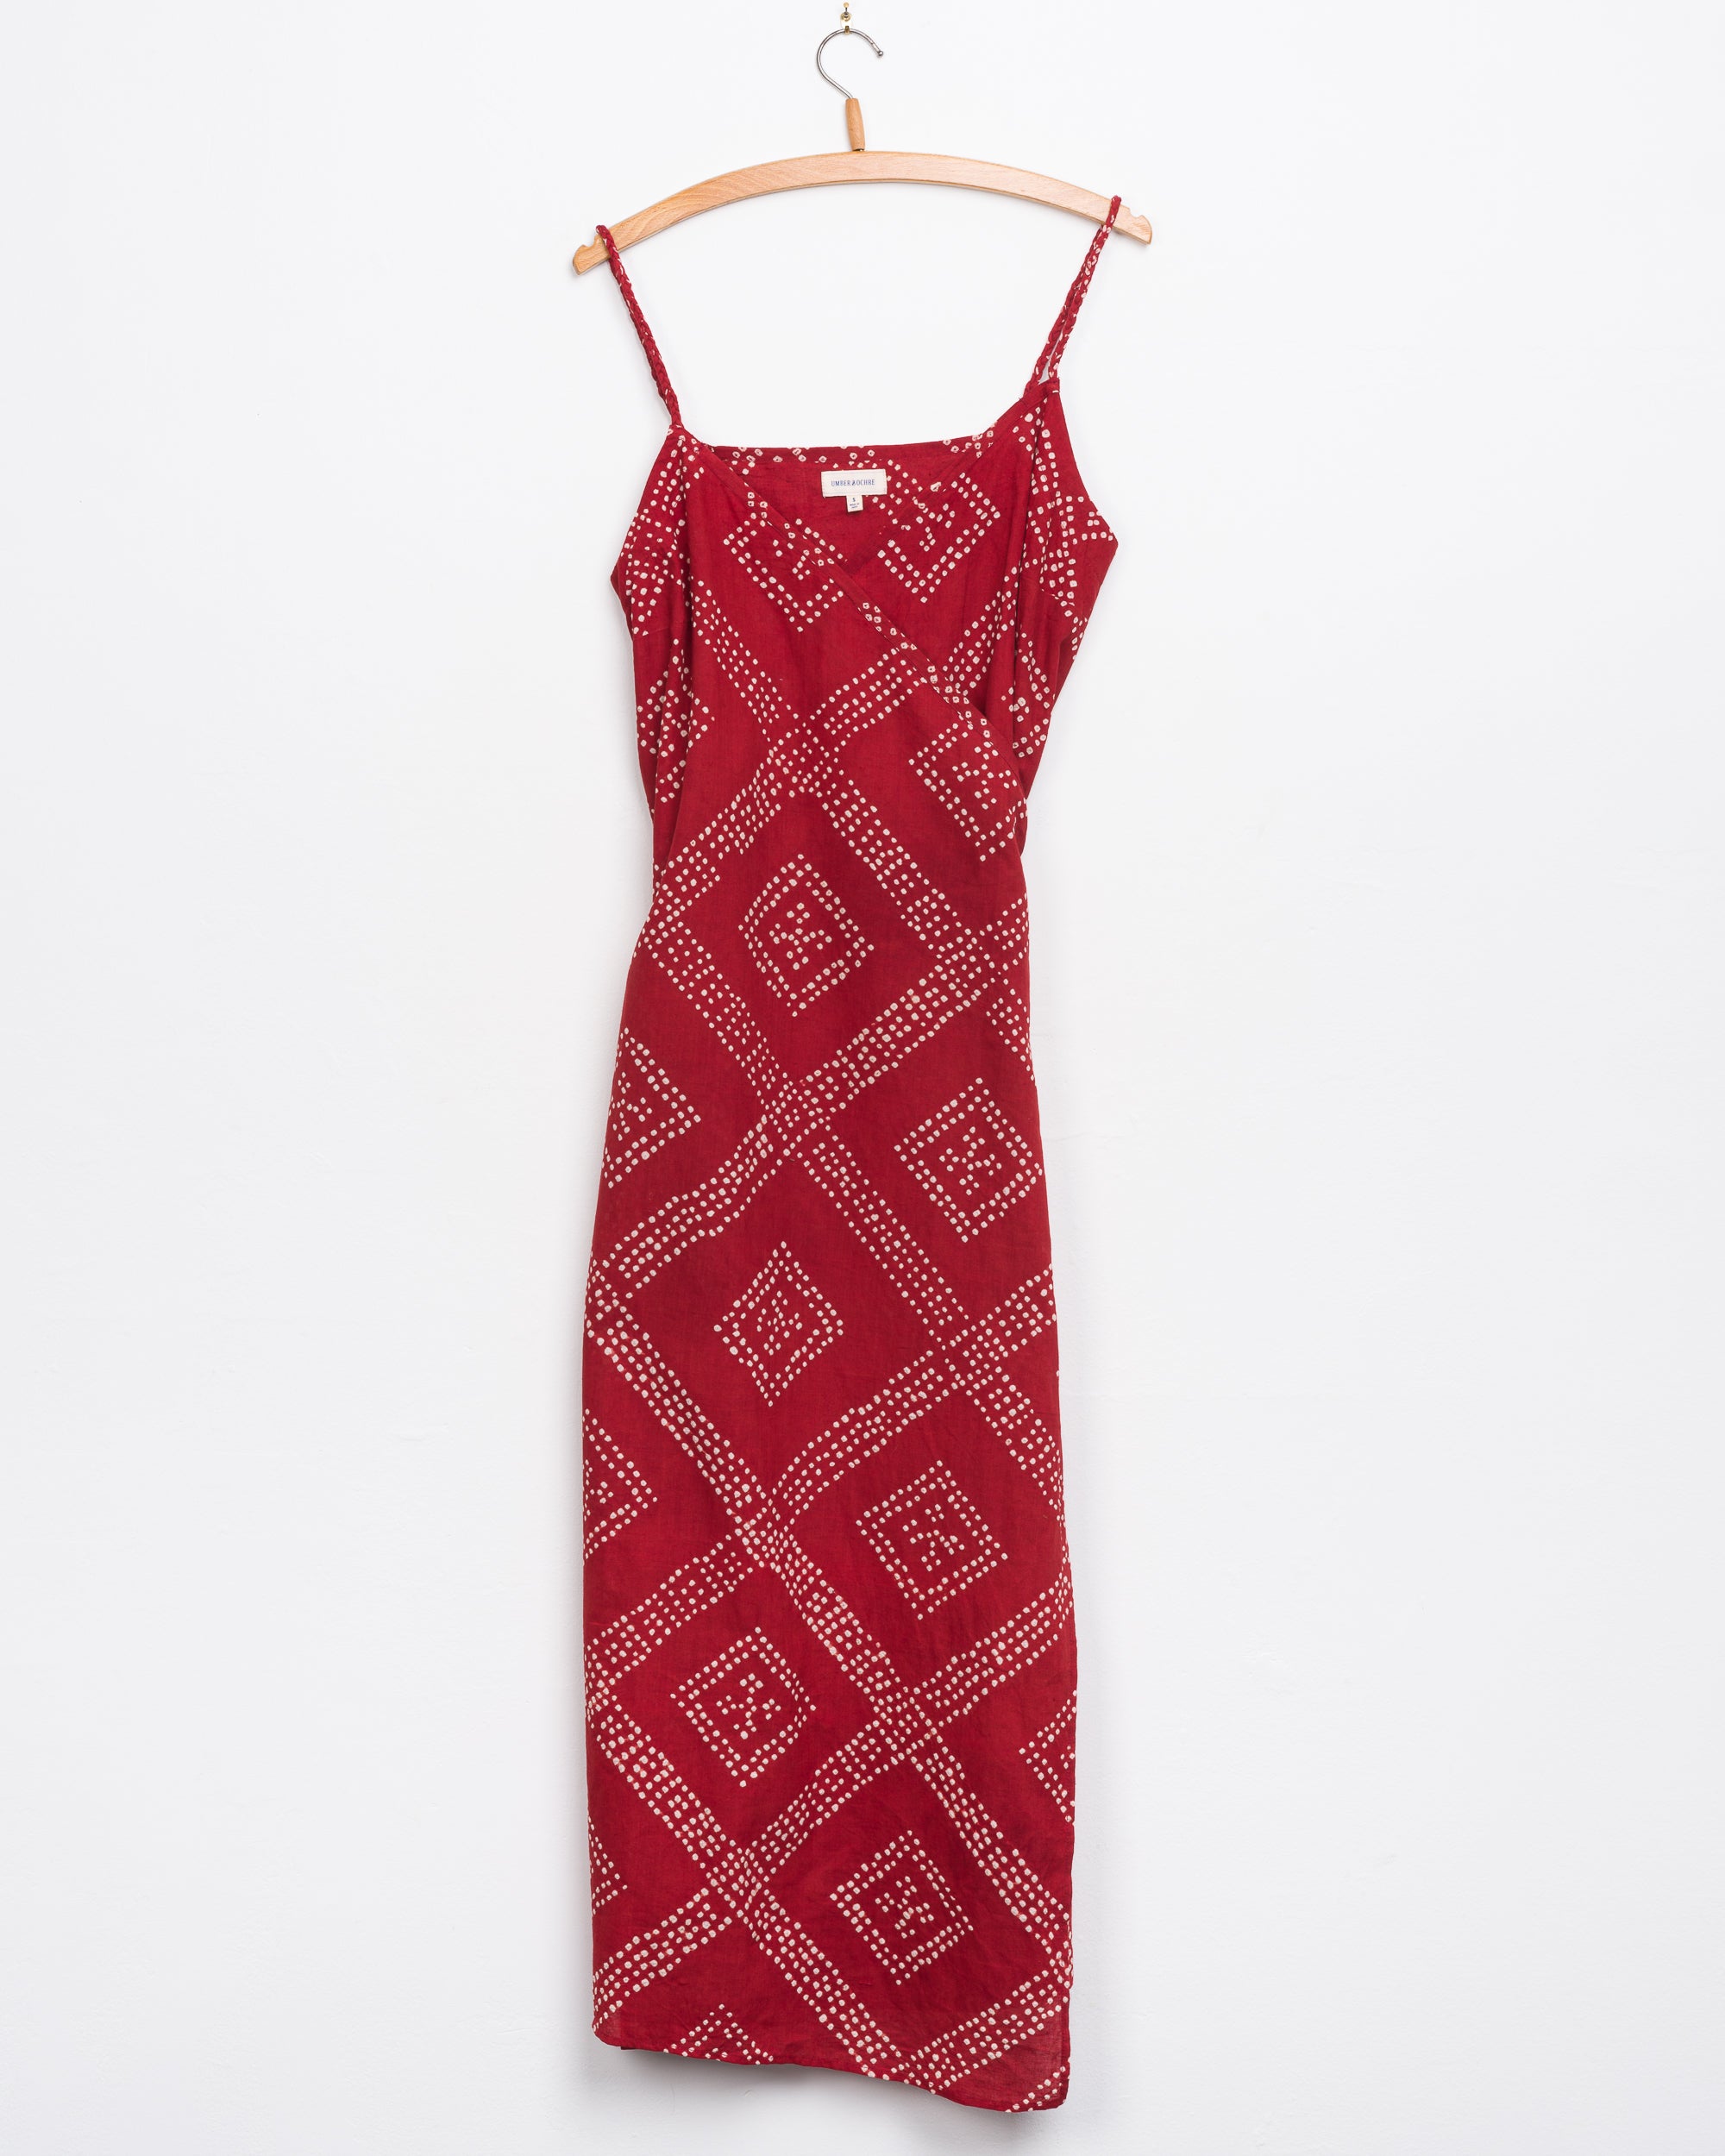 Aahana Strappy Wrap Dress in Red Tile Bandhani MW